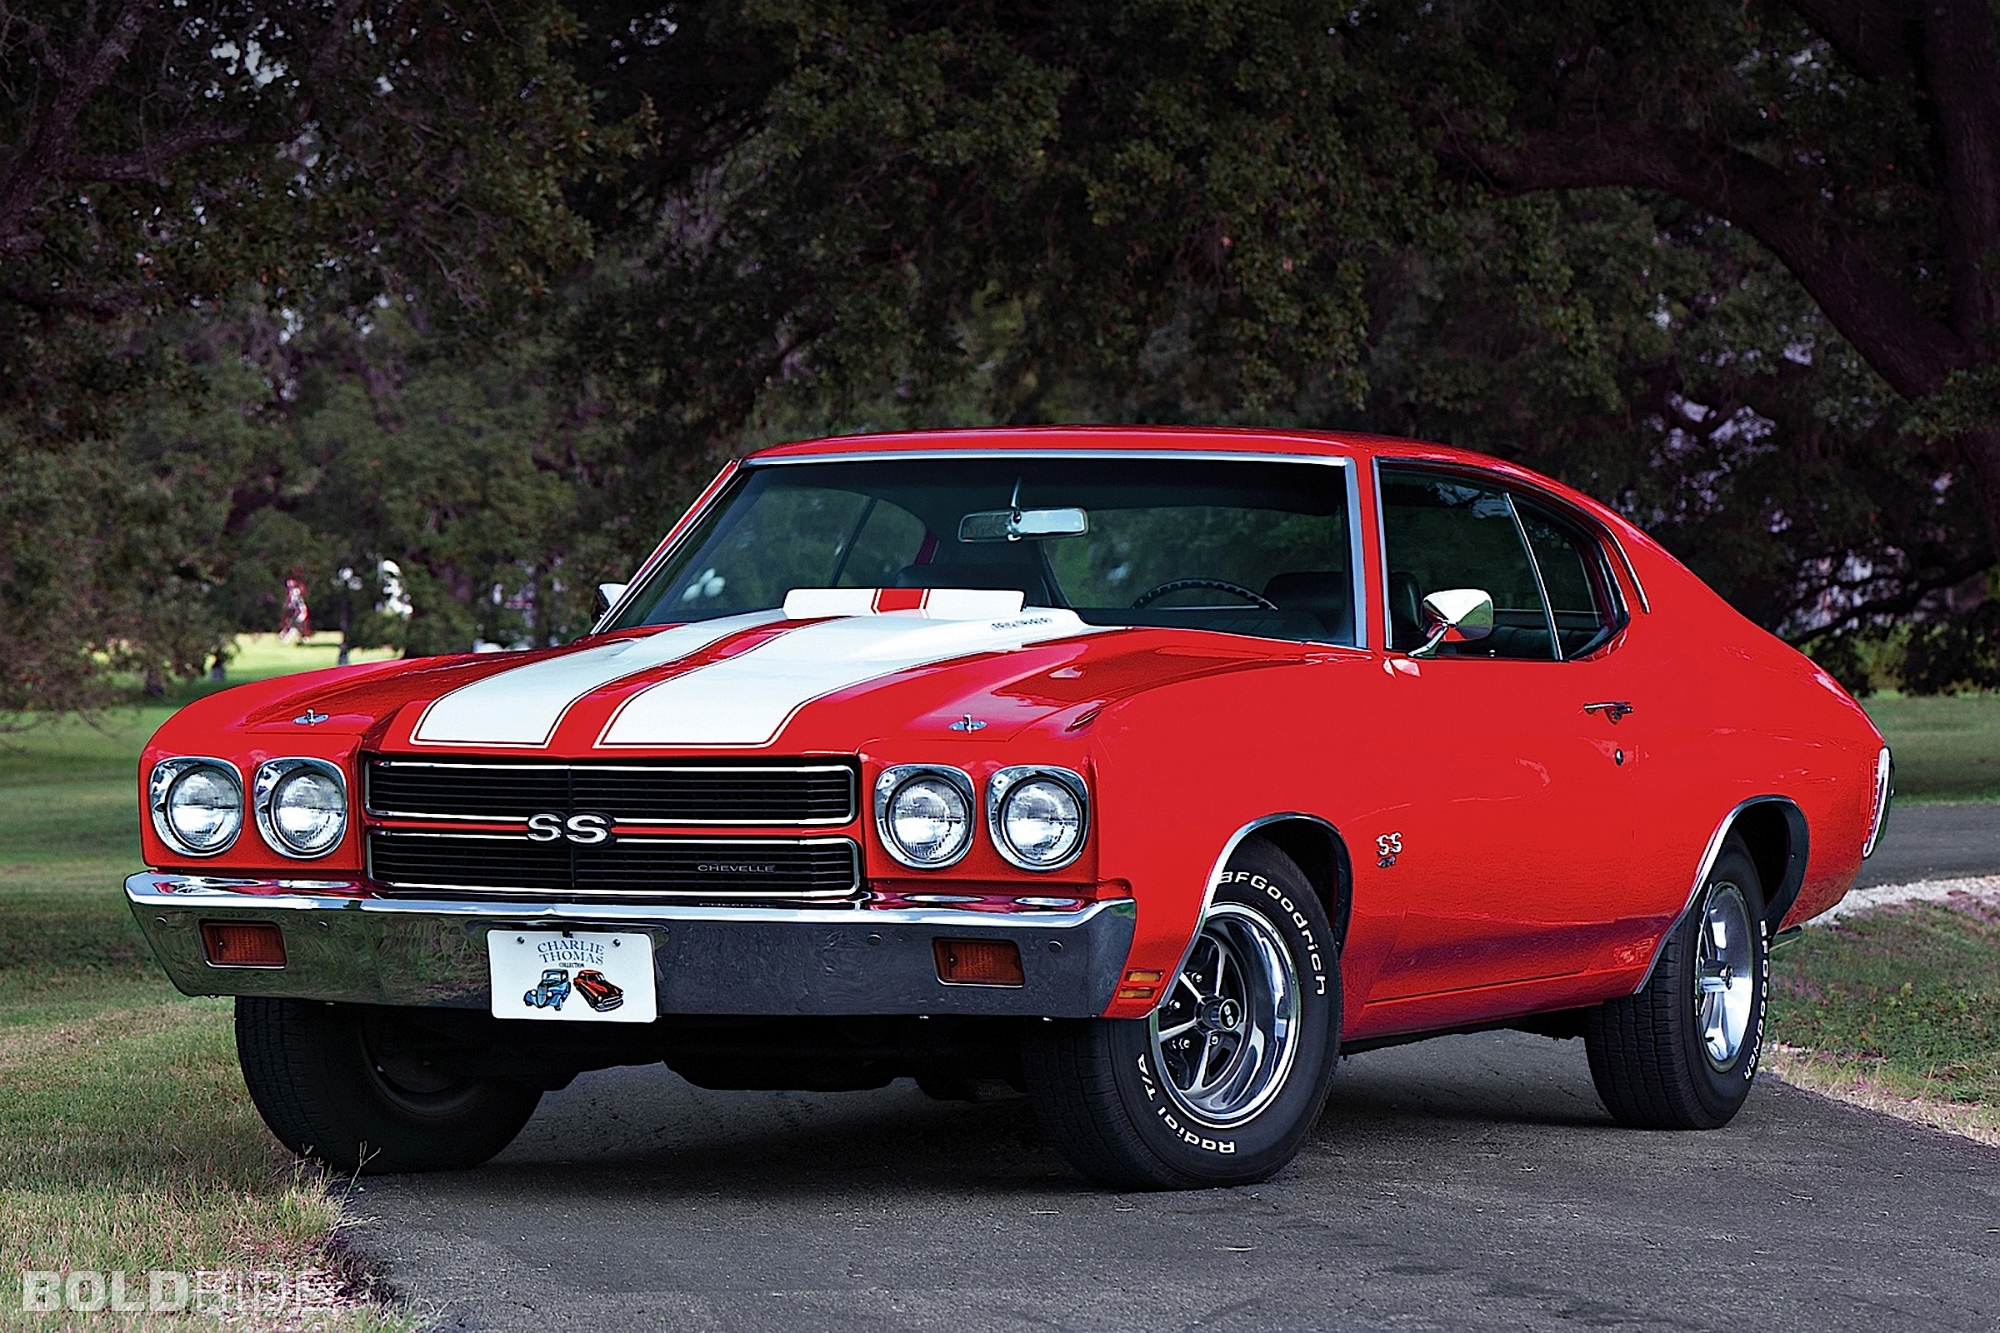 Chevrolet Chevelle SS Pics, Vehicles Collection